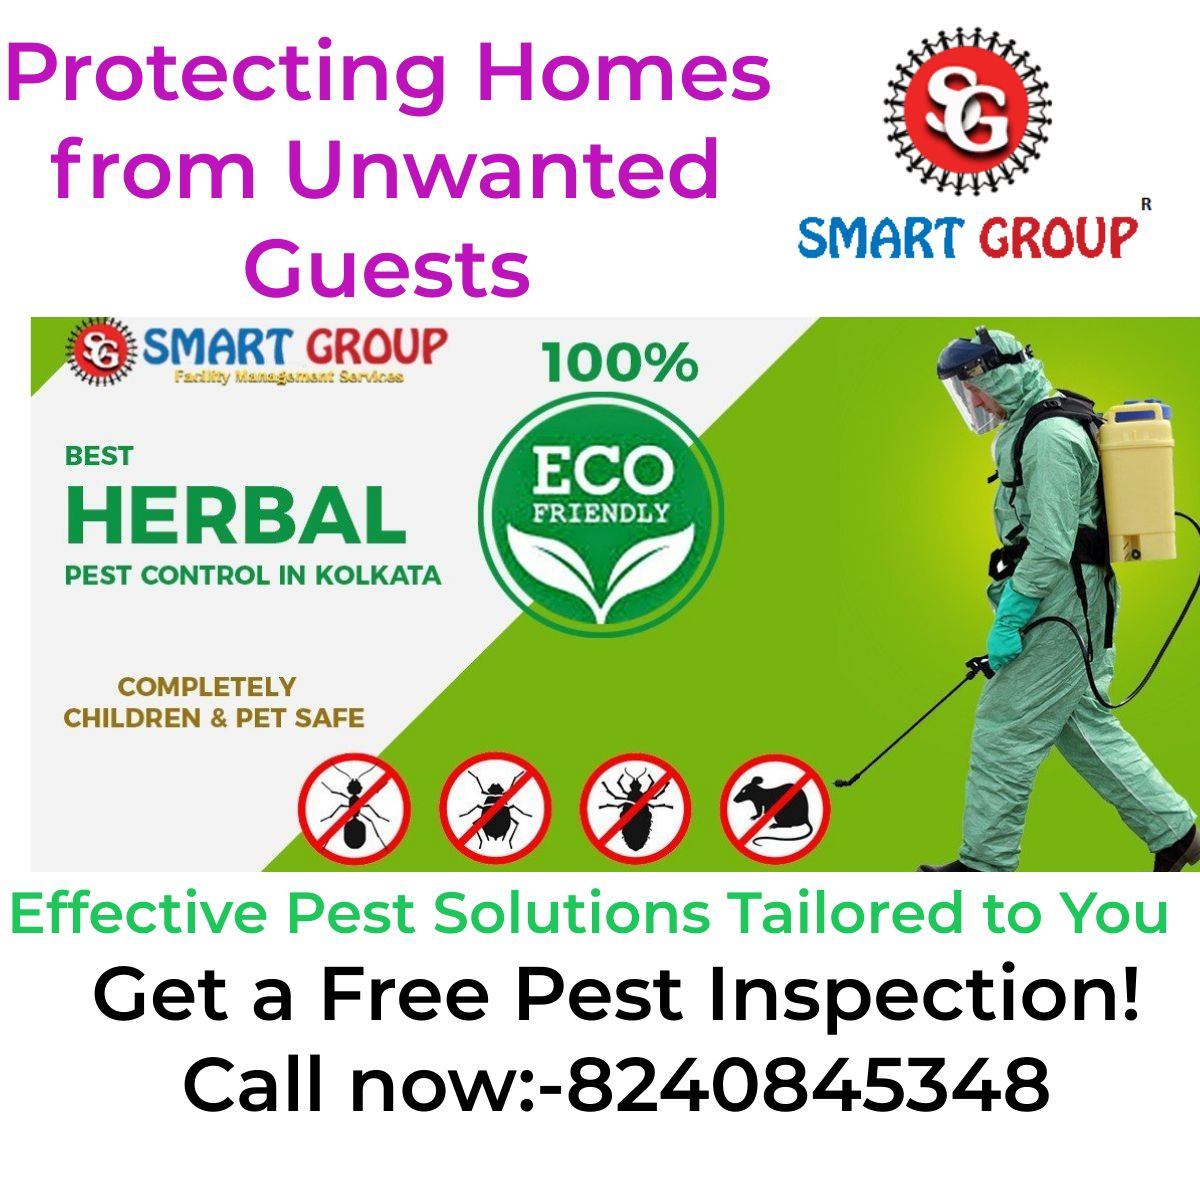 SECURITY SERVICE ,HOUSEKEEPING SERVICE ,PEST CONTROL SERVICE